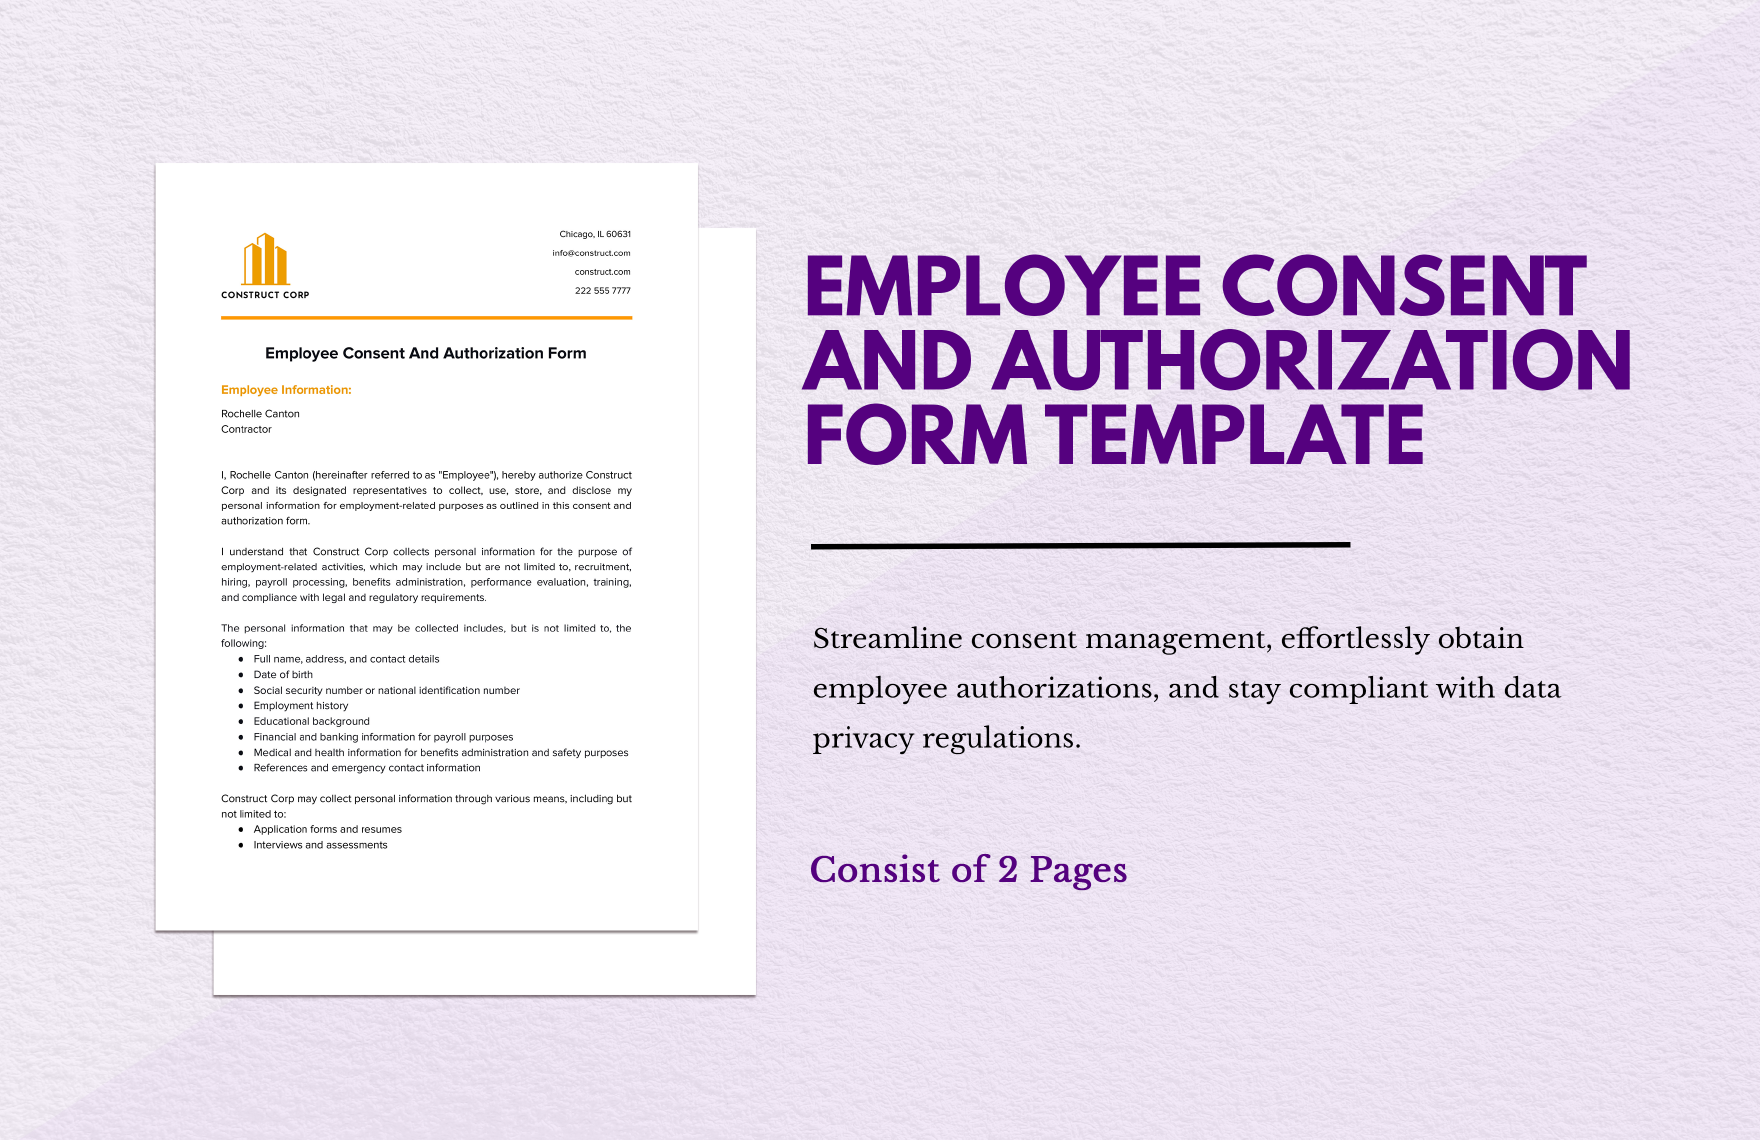 Employee Consent and Authorization Form in Word, Google Docs